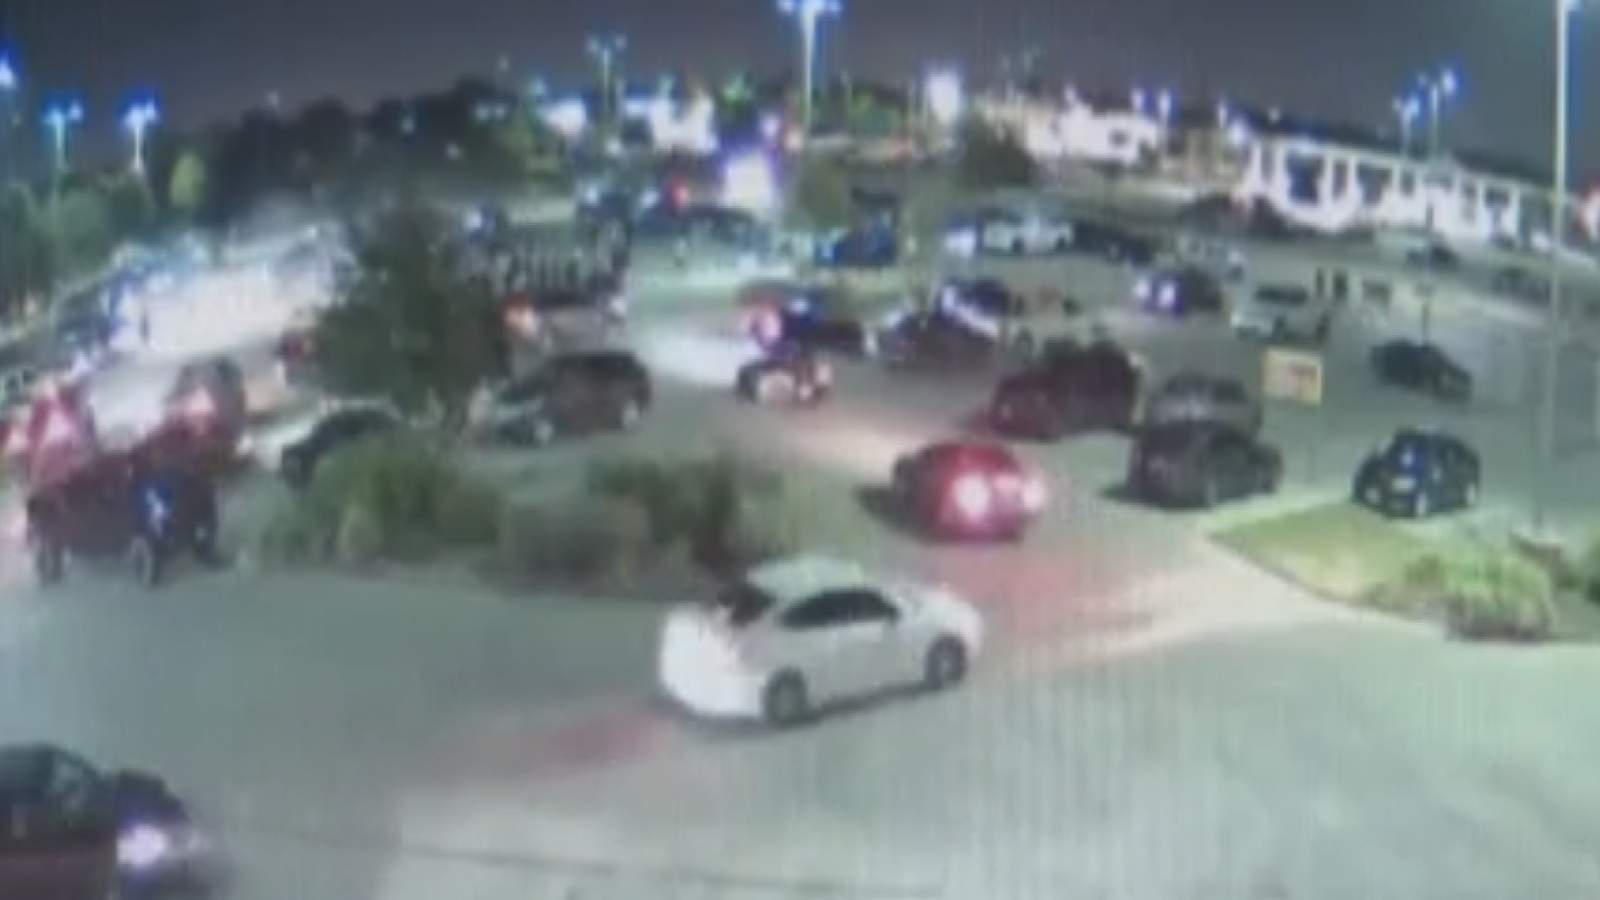 Over 100 people take over supermarket parking lot for dangerous parties